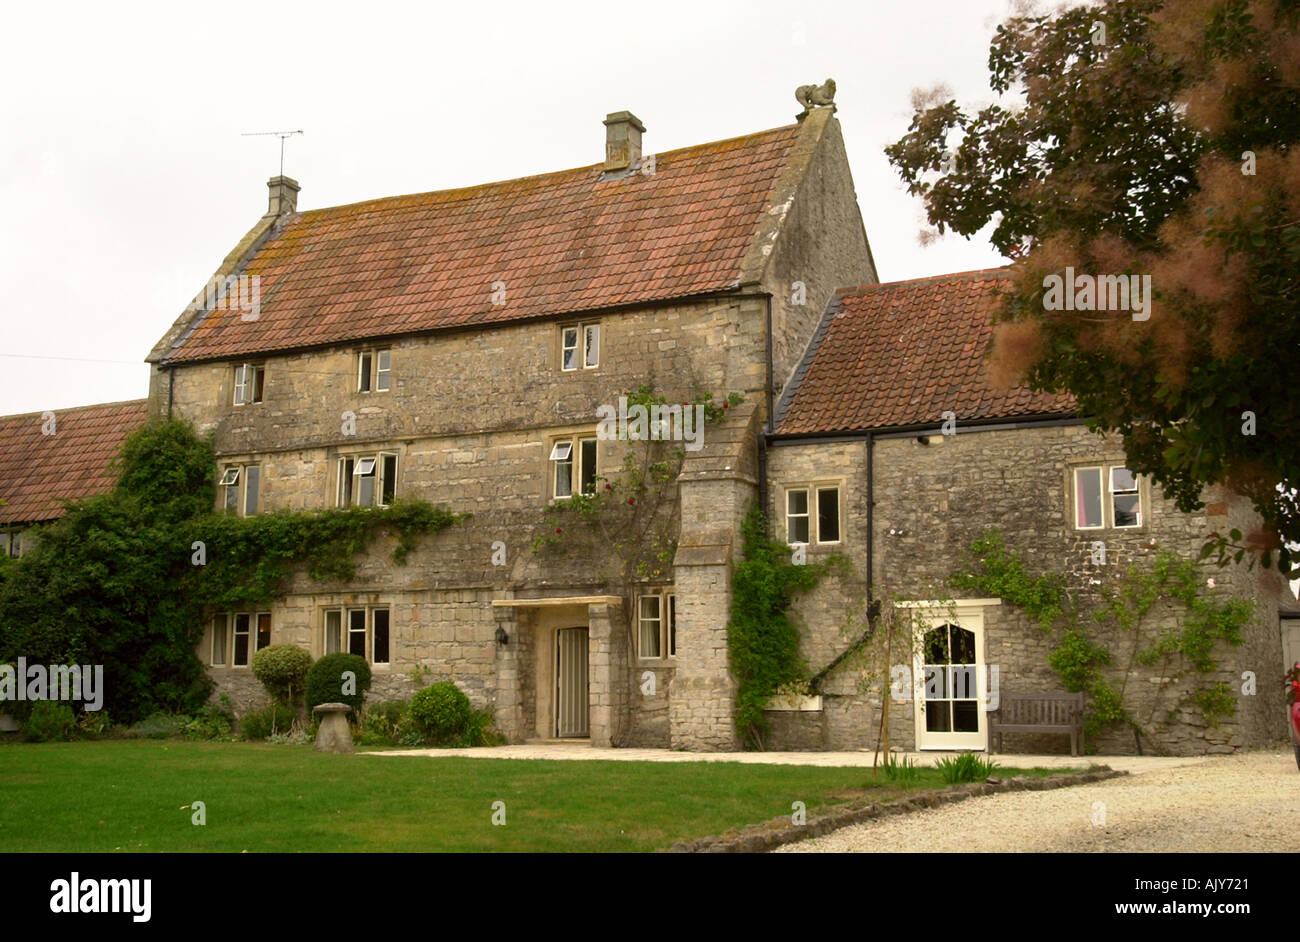 SALTFORD MANOR NEAR BATH UK WHICH HAS WON THE COUNTRY LIFE OLDEST INHABITED HOUSE IN ENGLAND COMPETITION AUG 2003 Stock Photo